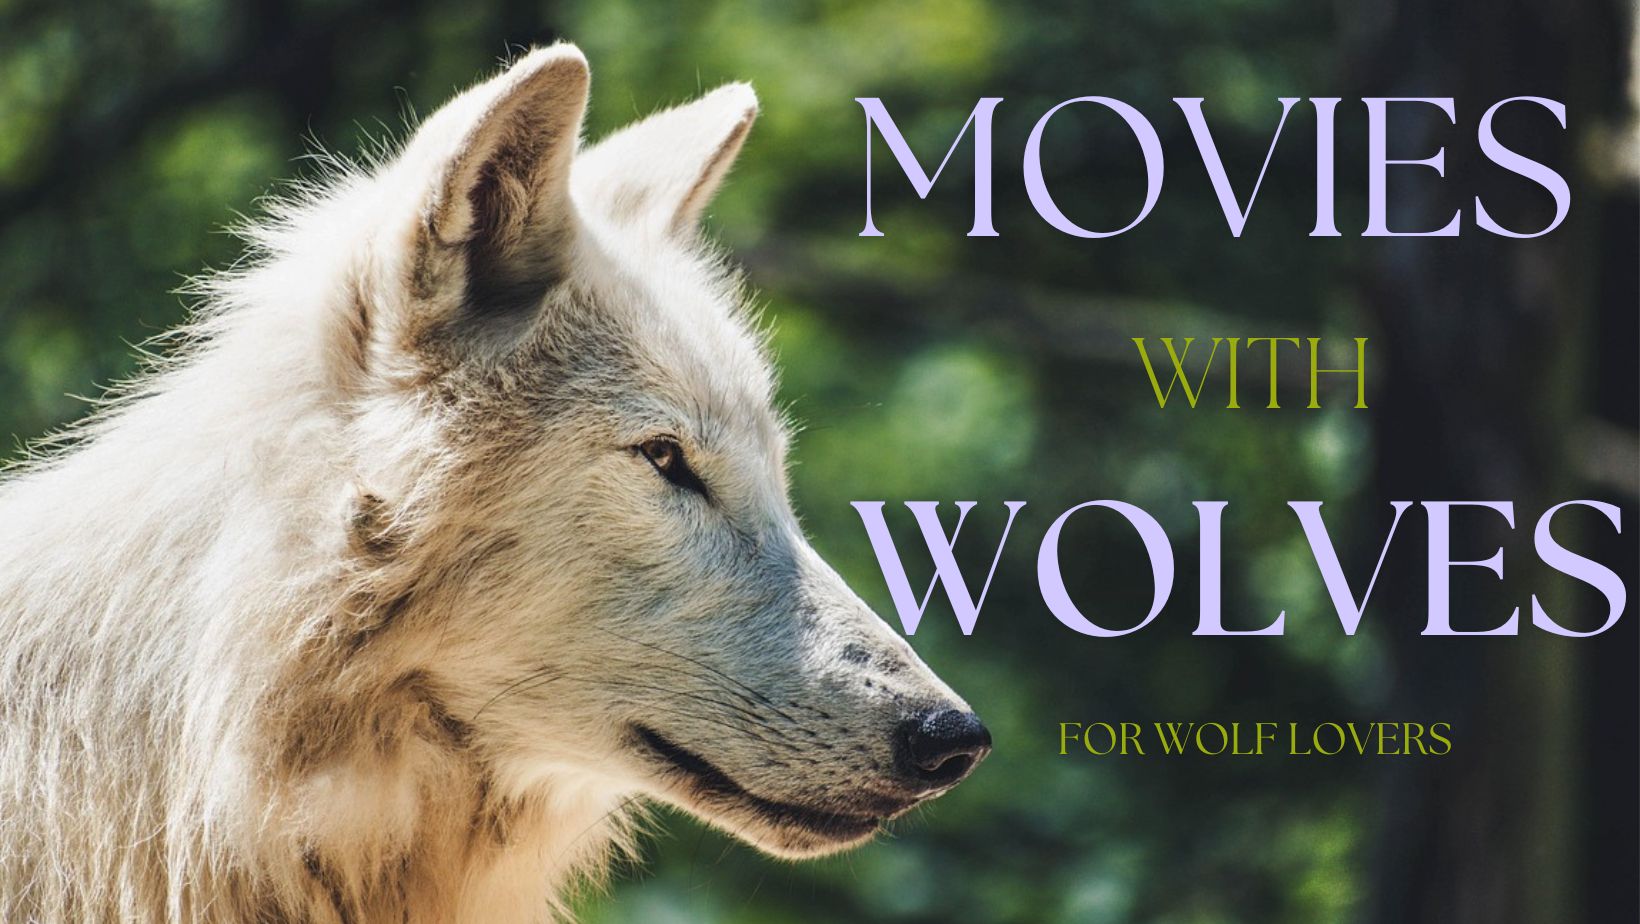 Image of white wolf with text "Movies with Wolves for Wolf Lovers"